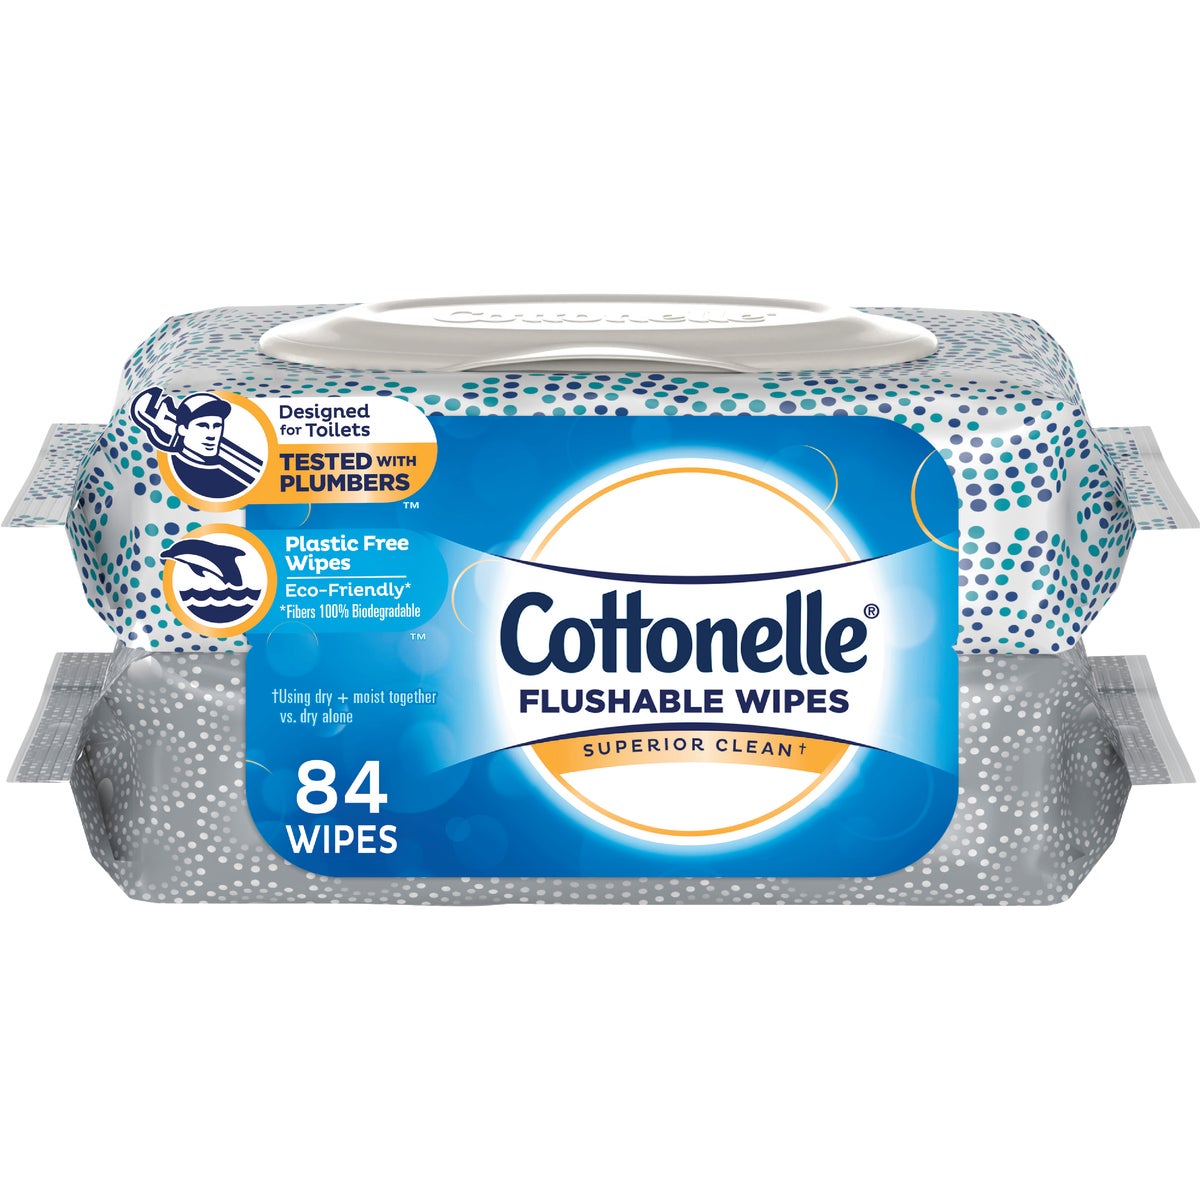 Cottonelle Flushable Wet Wipes, 2 Flip-Top Packs of 42 Wipes, 84 Total Wipes - image 1 of 10